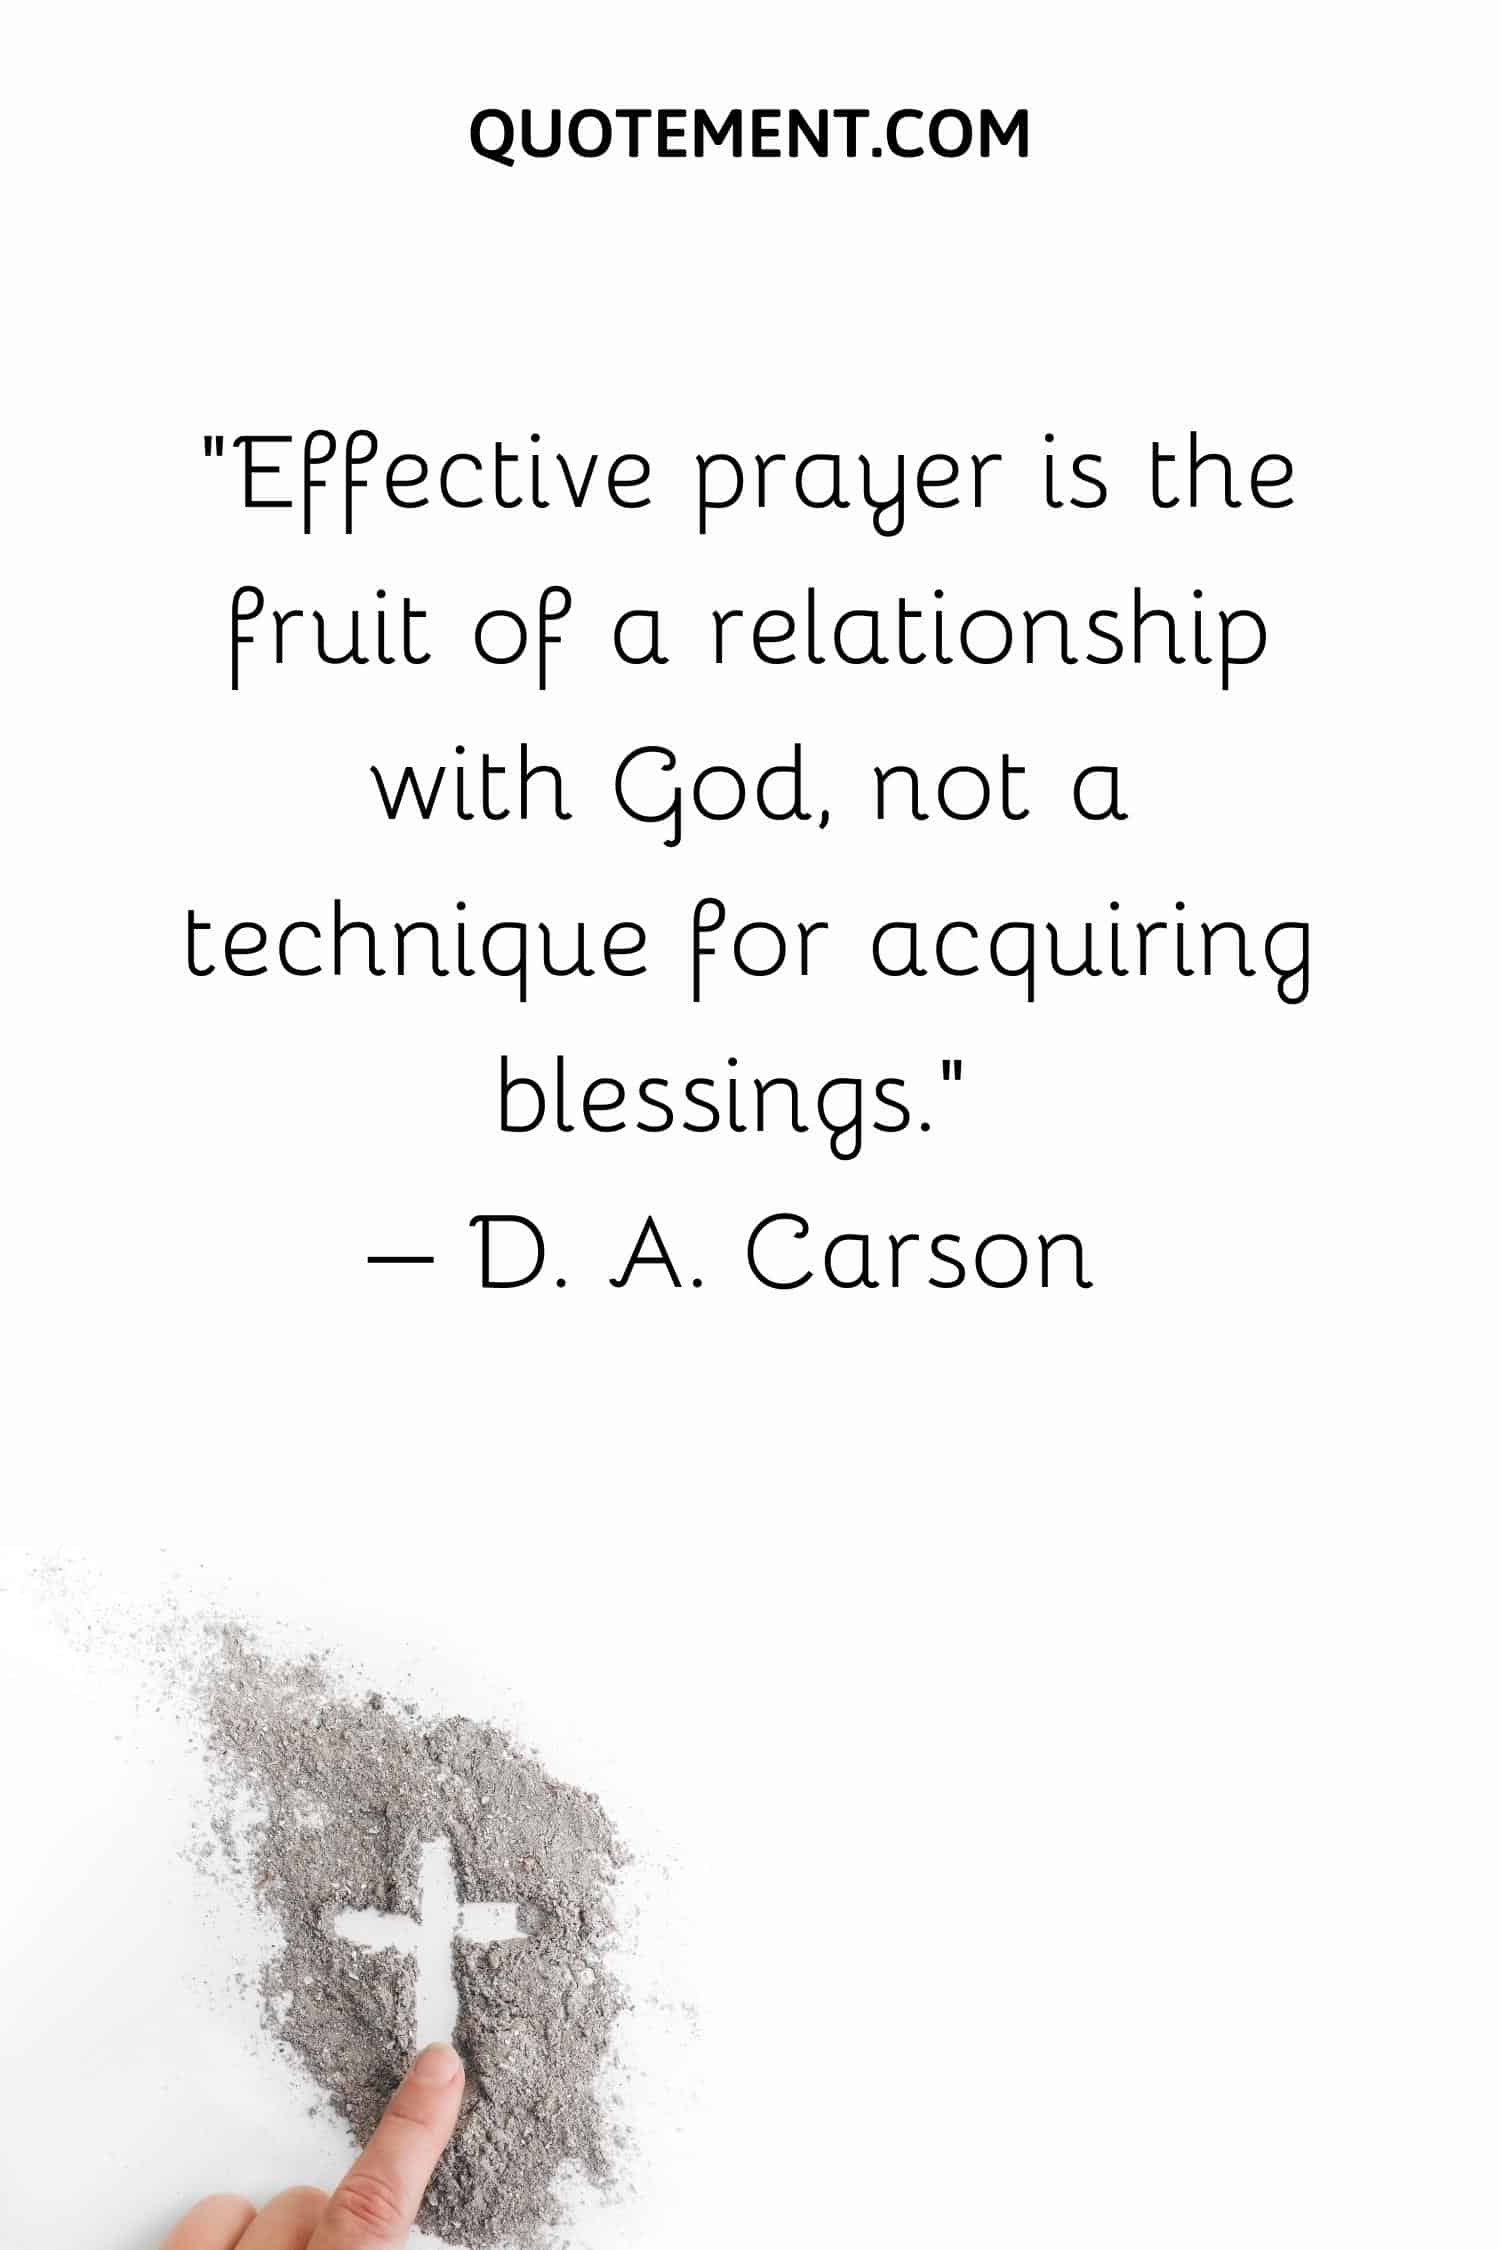 Effective prayer is the fruit of a relationship with God, not a technique for acquiring blessings